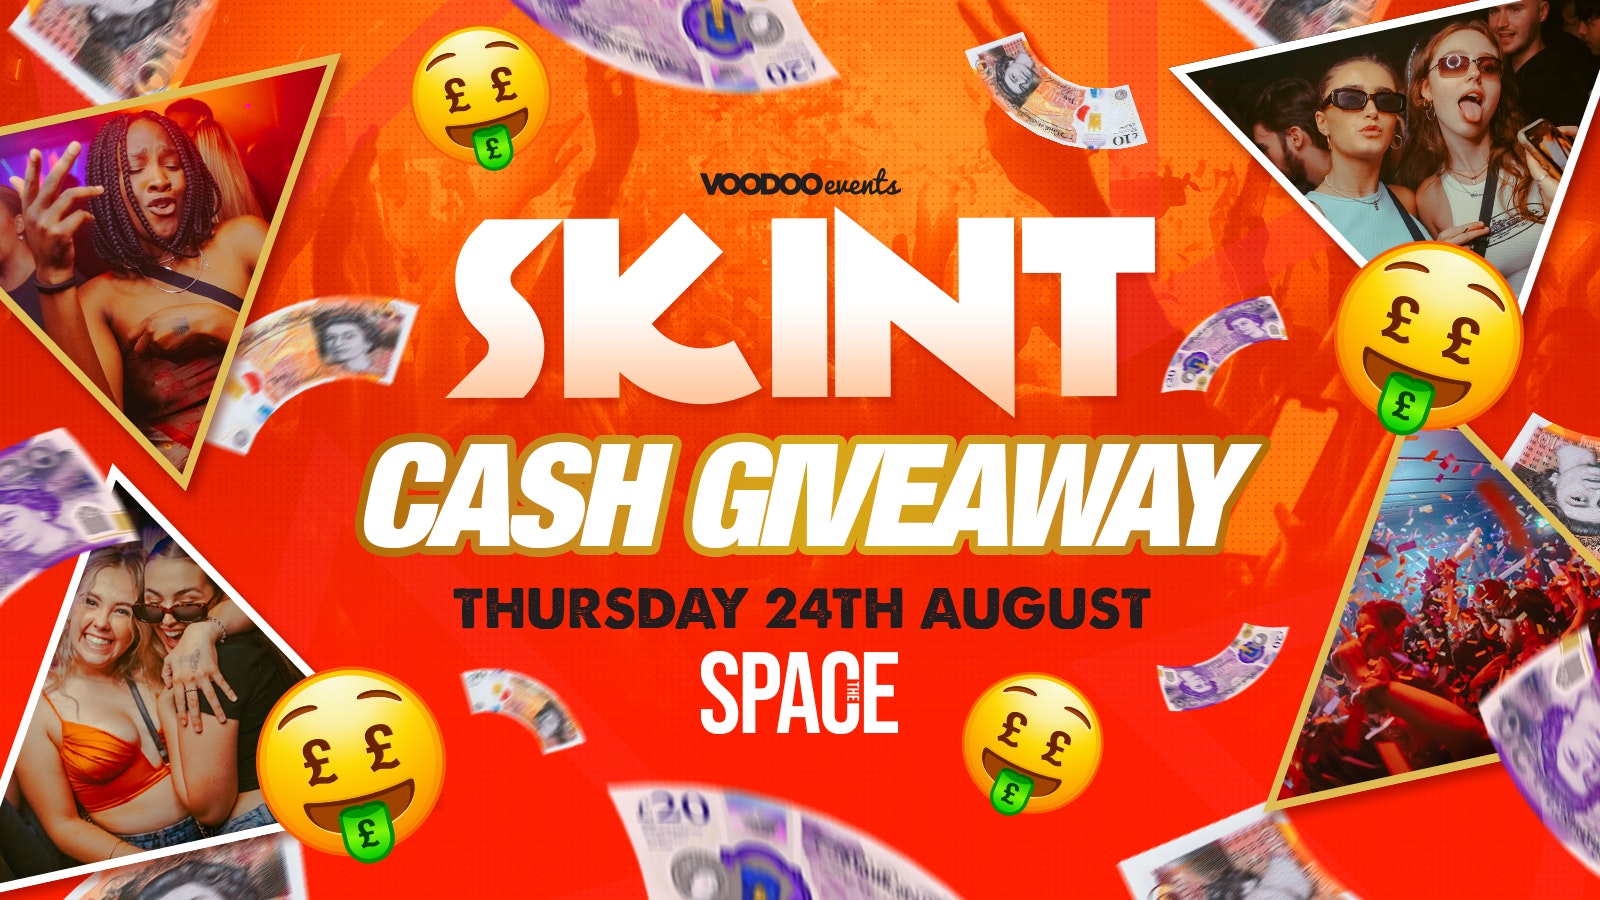 Skint Thursdays at Space – Cash Giveaway – 24th August